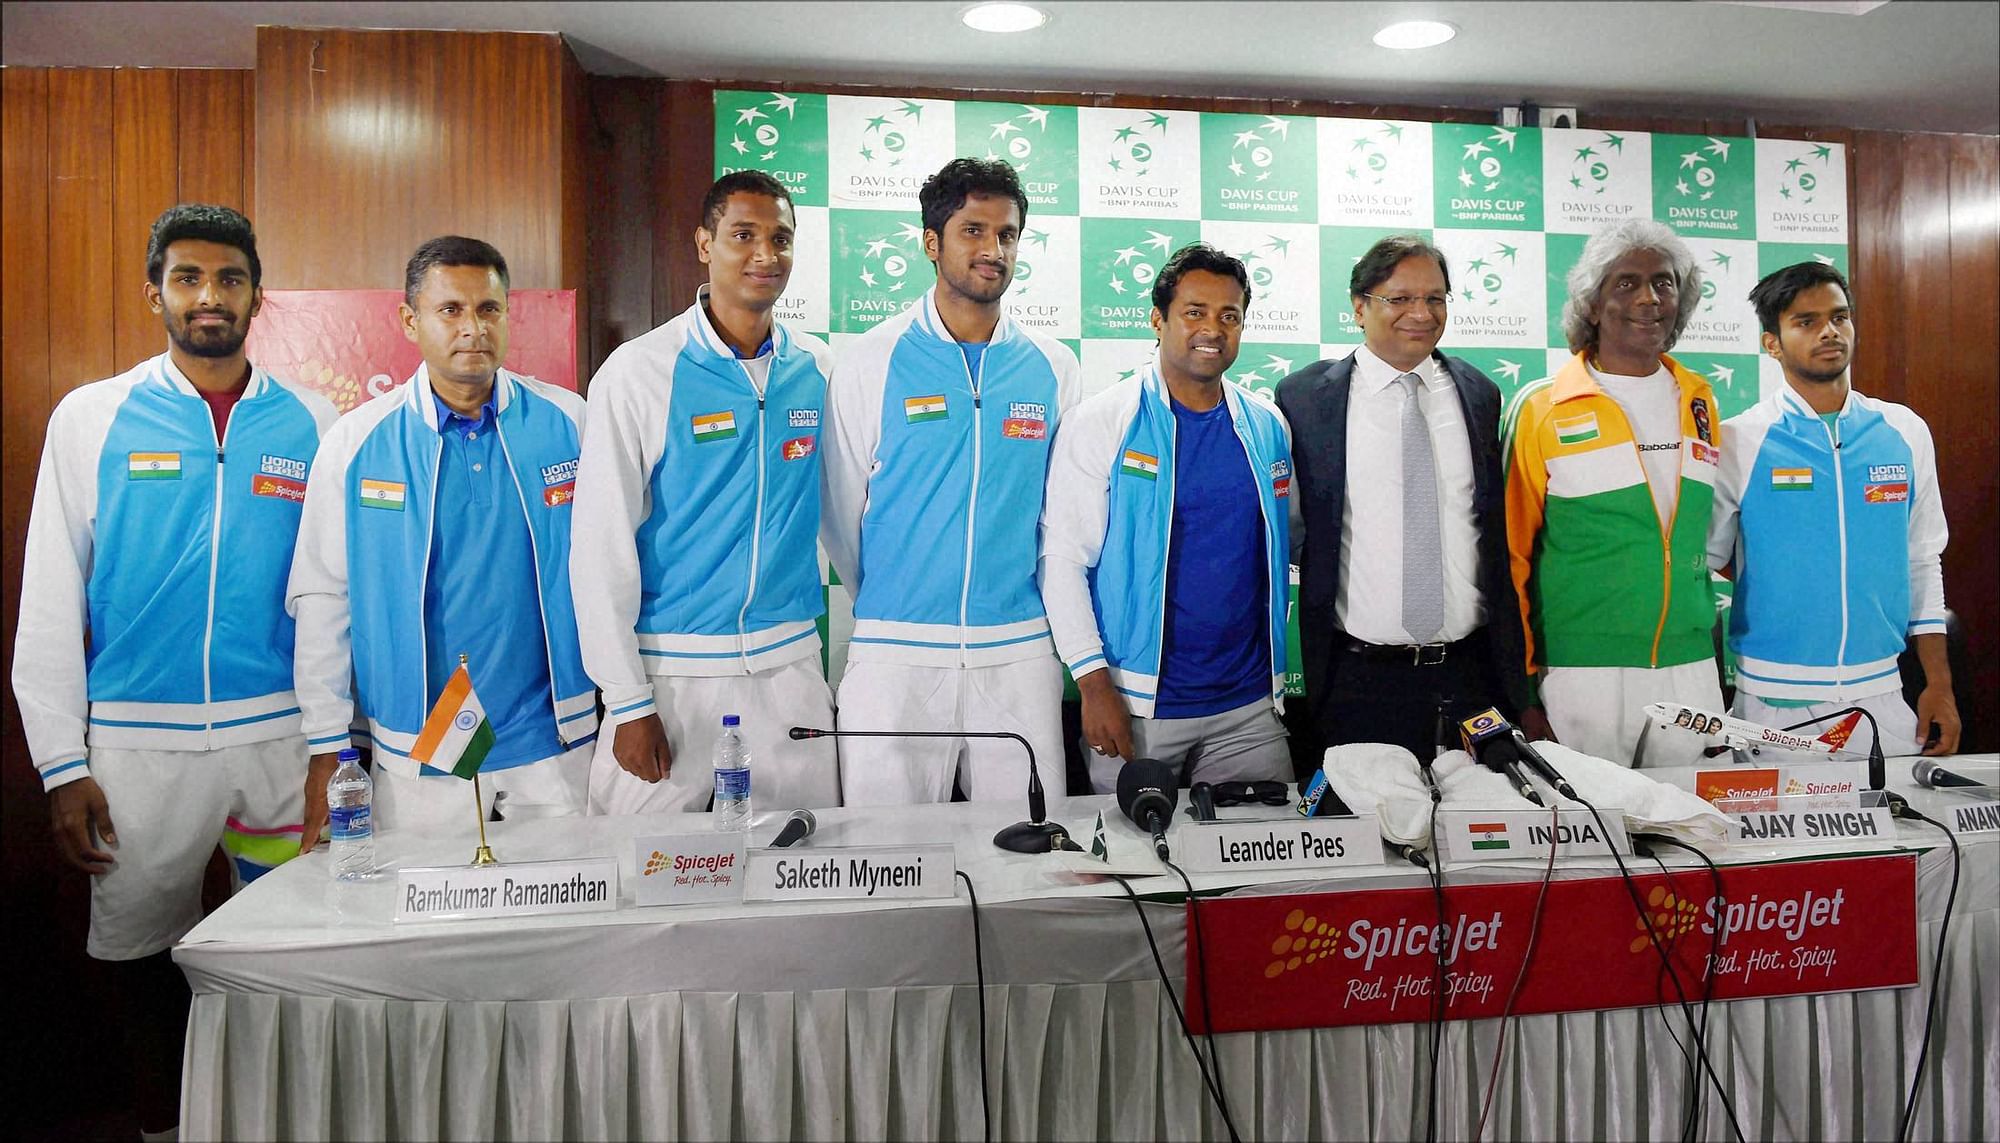 File picture of the Indian Davis Cup team that will now travel to Nur-Sultan to take on Pakistan in the upcoming Davis Cup tie.